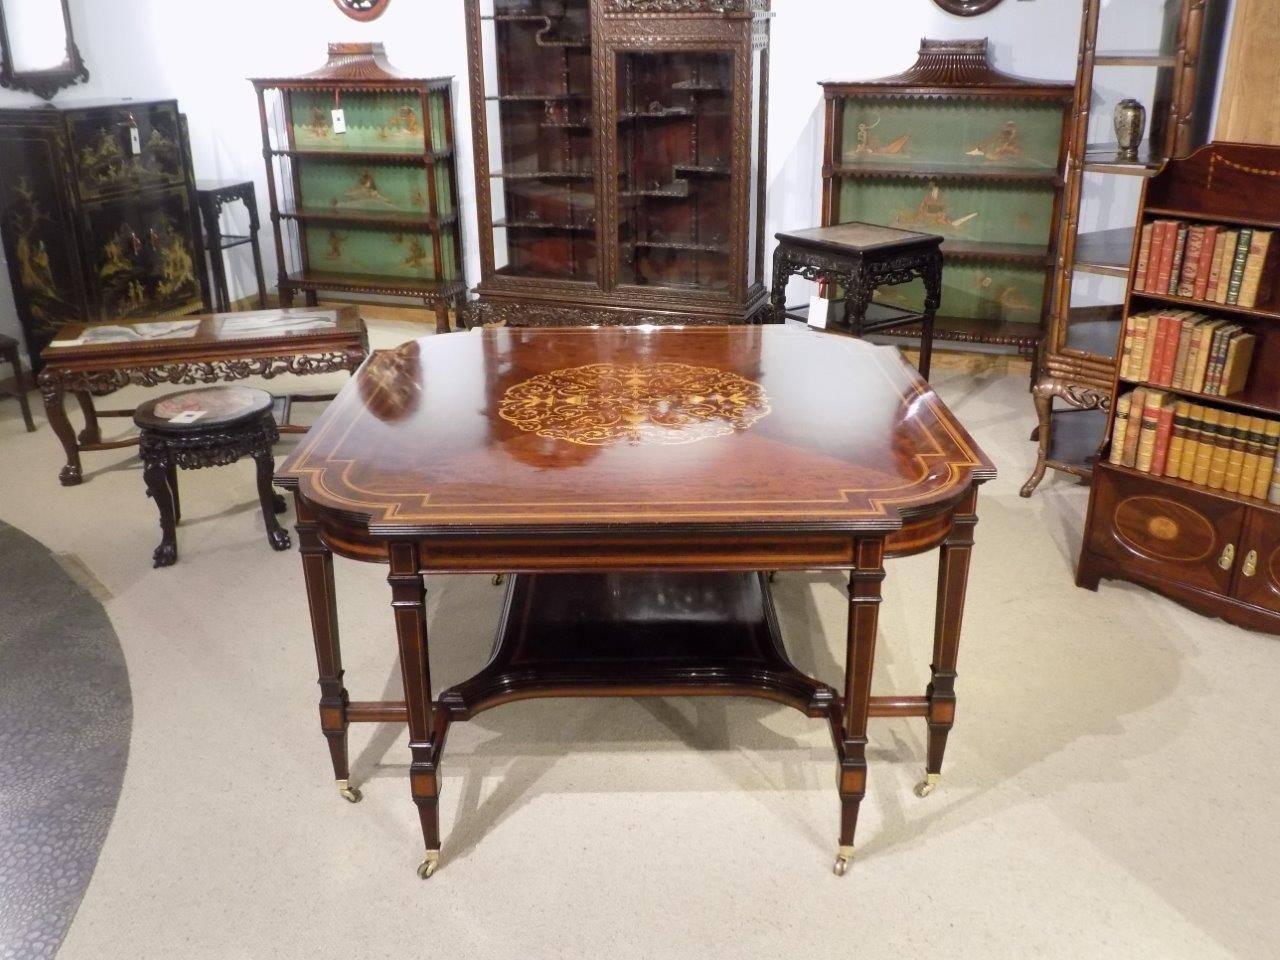 A large and rare mahogany inlaid Edwardian period antique centre table by Edwards & Roberts of London. Having a beautifully figured mahogany top with a double satinwood crossbanded border with a wonderful marquetry and pen-work central panel